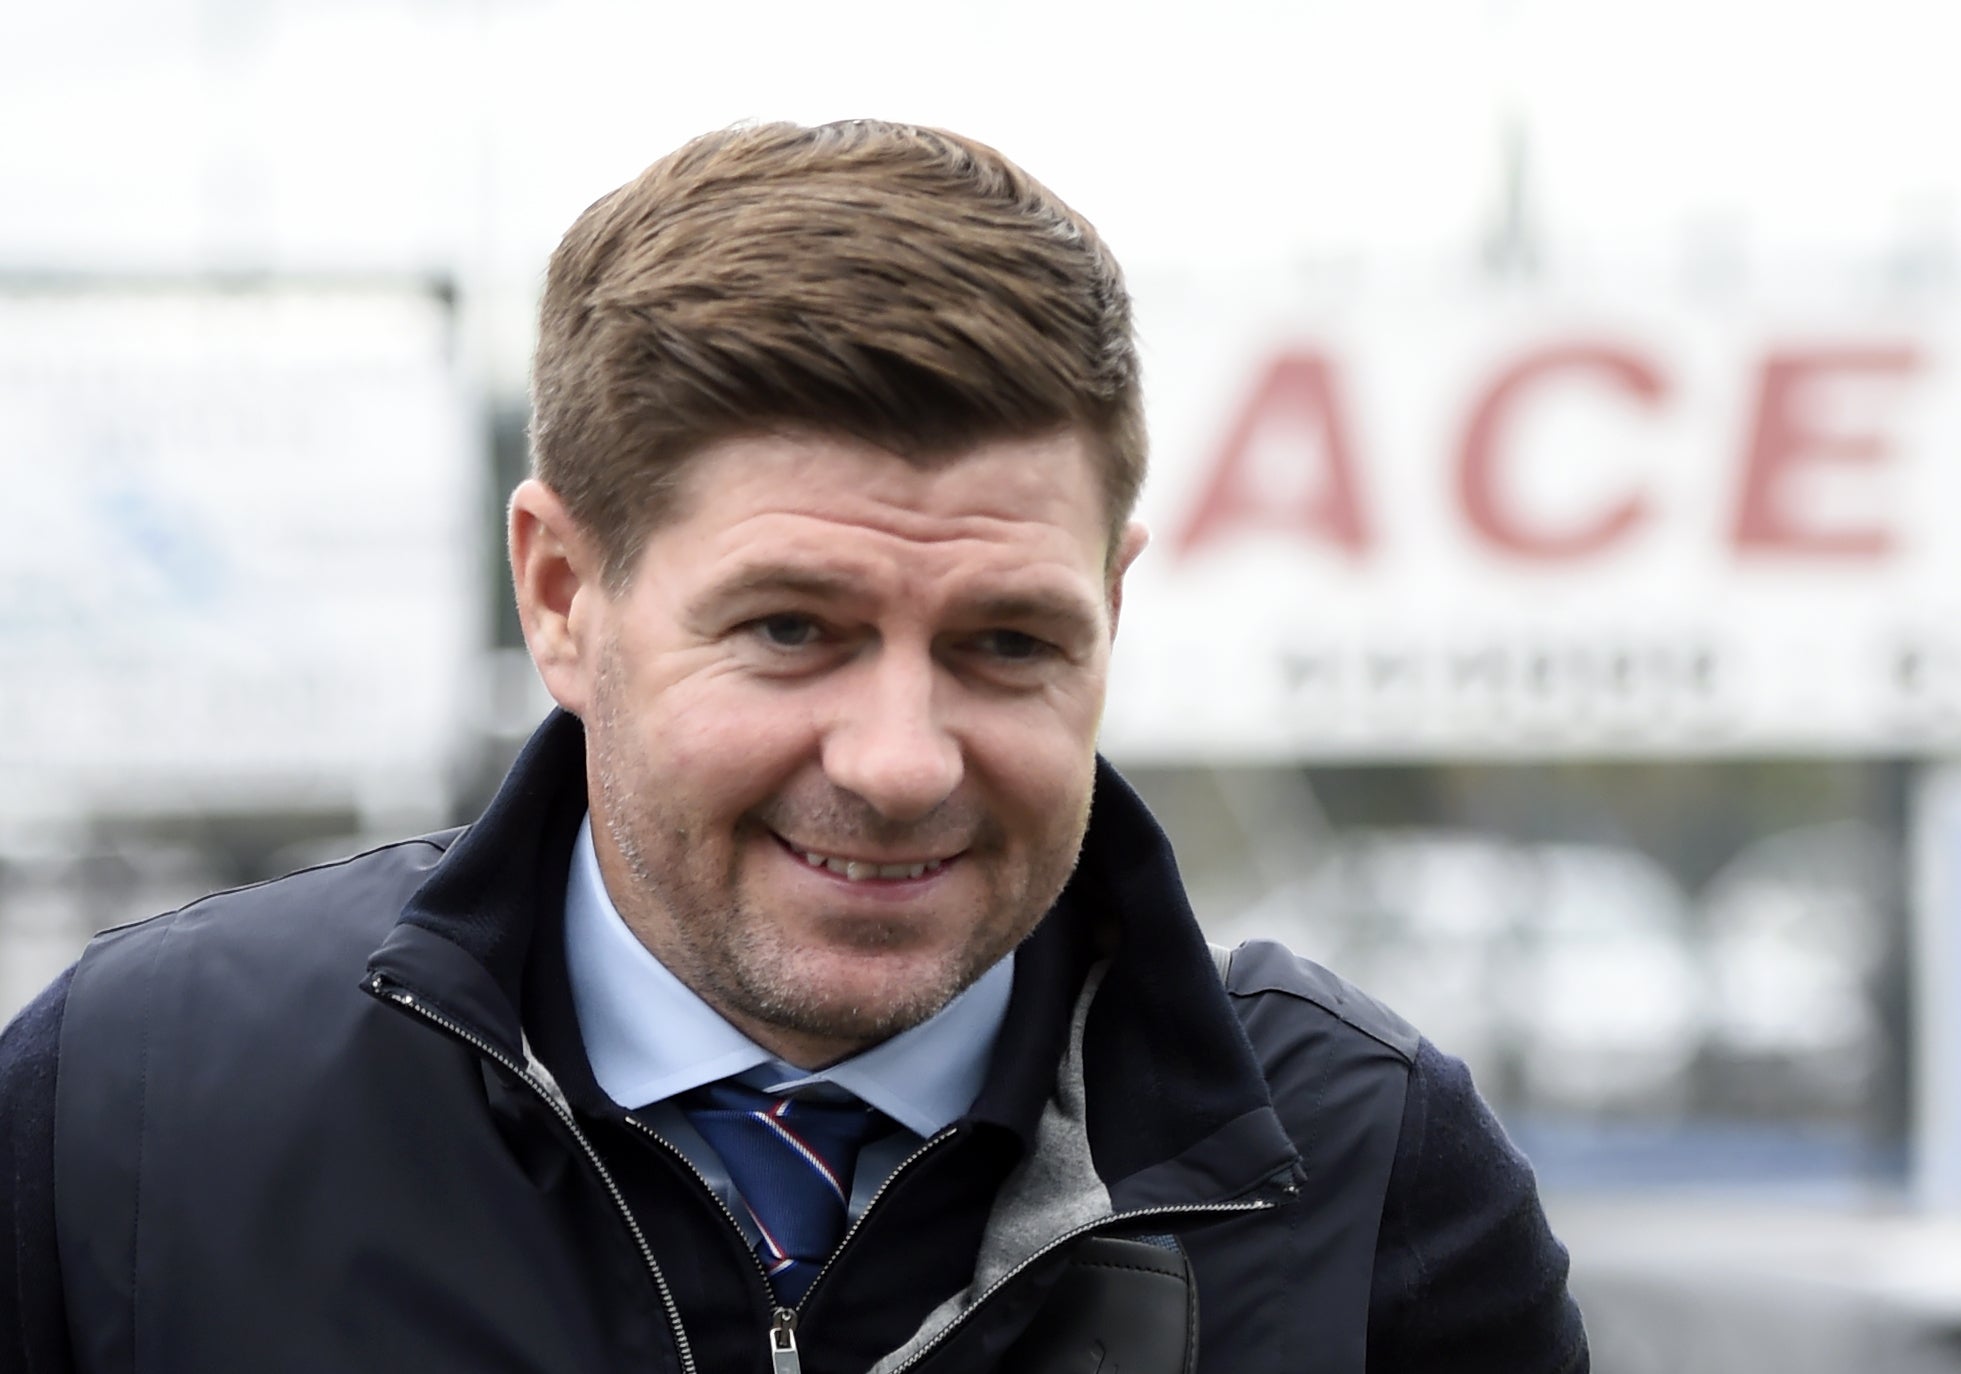 Steven Gerrard is the new man in charge at Aston Villa (Ian Rutherford/PA)